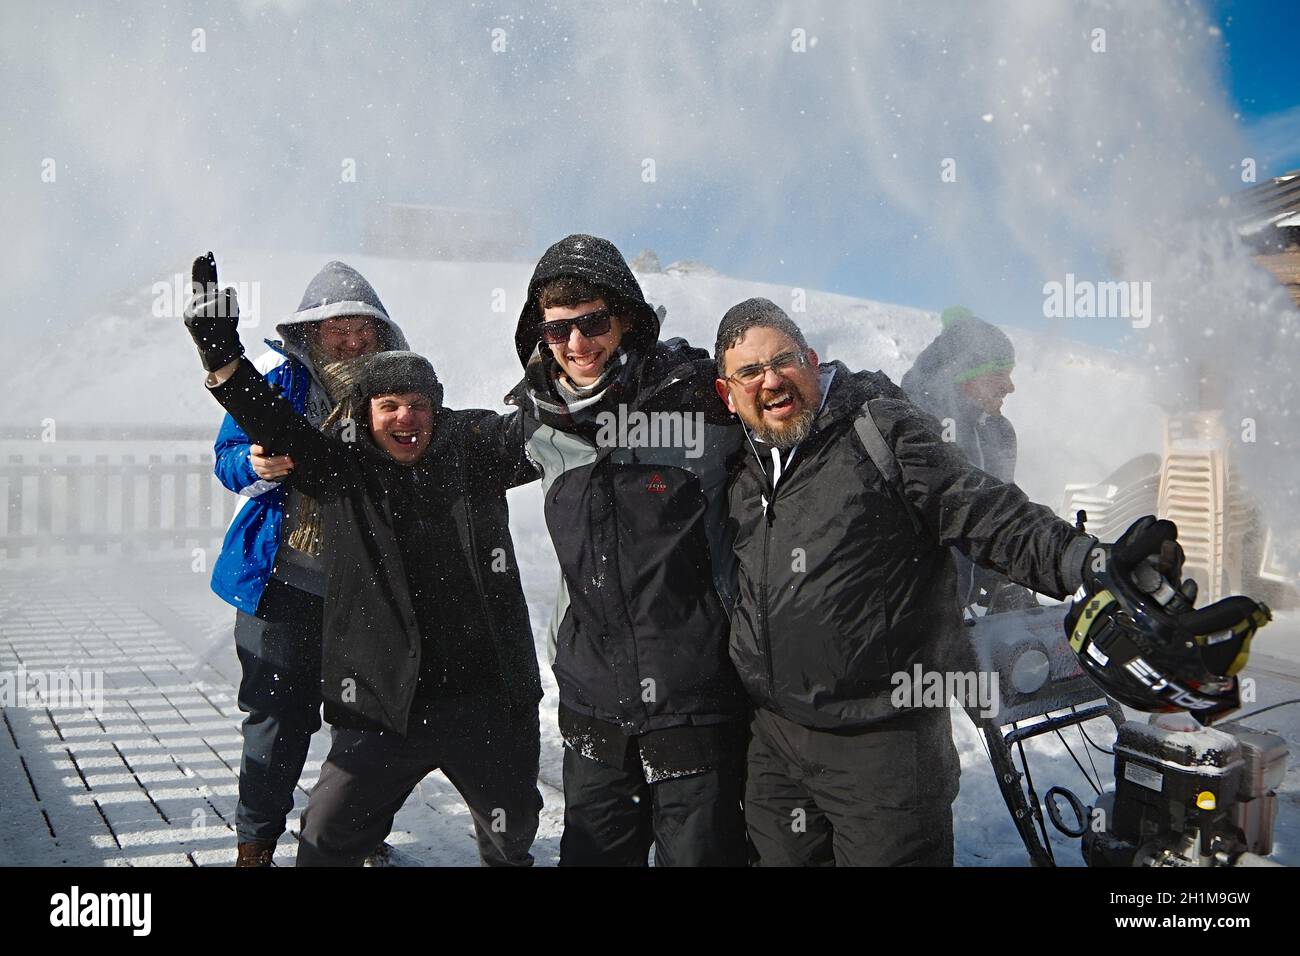 Les Orres, France - Circa 2015: Happy skiers posing for group photos while someone blasting snow on them using snow plowing machine to clear the terra Stock Photo